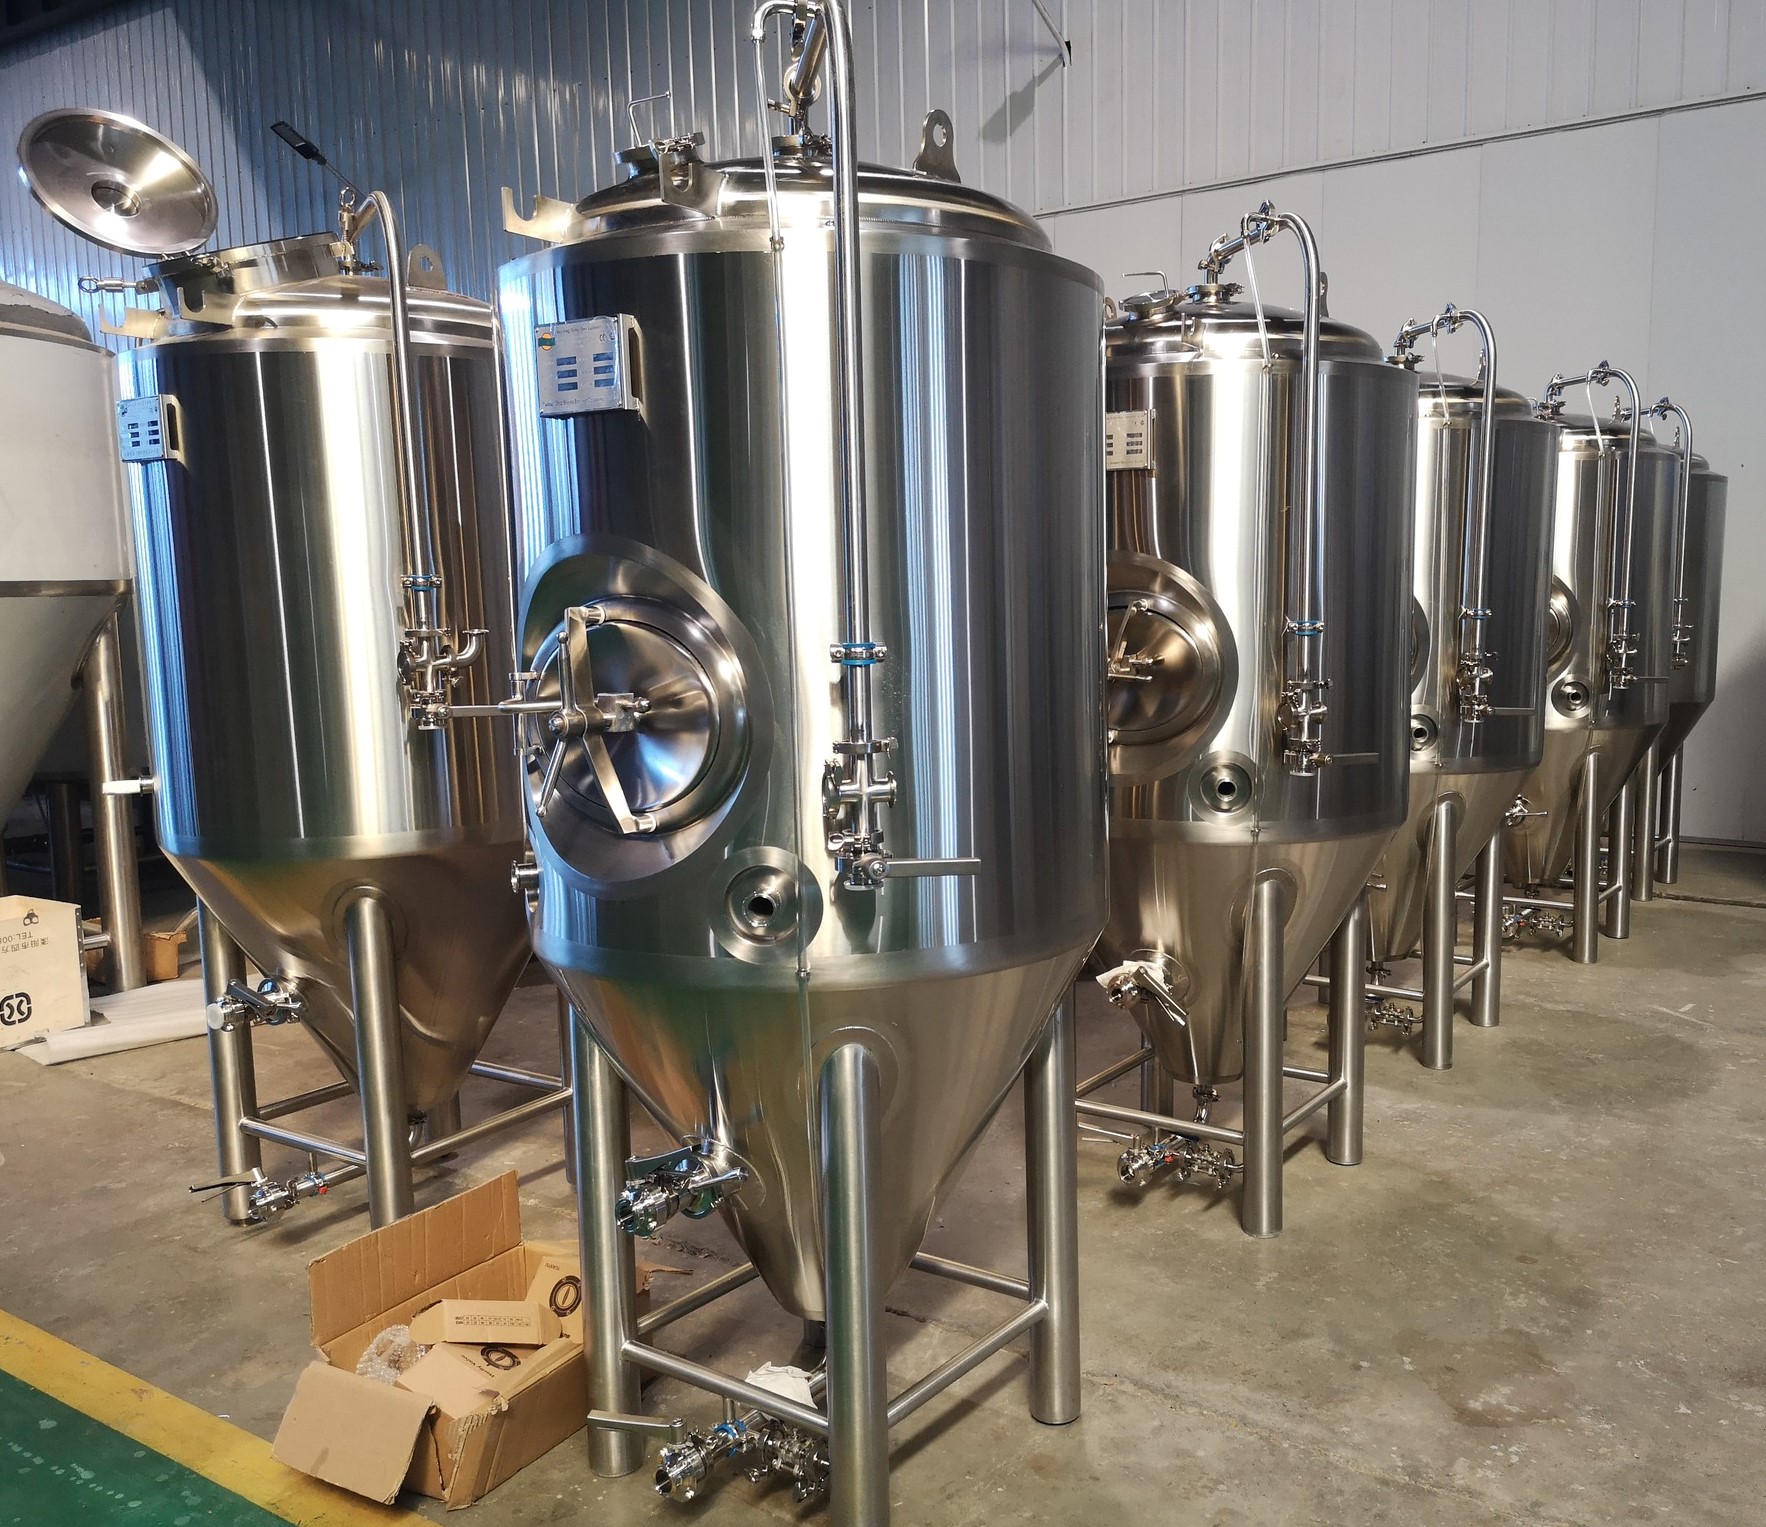 Why is the beer fermentation tank a conical design?